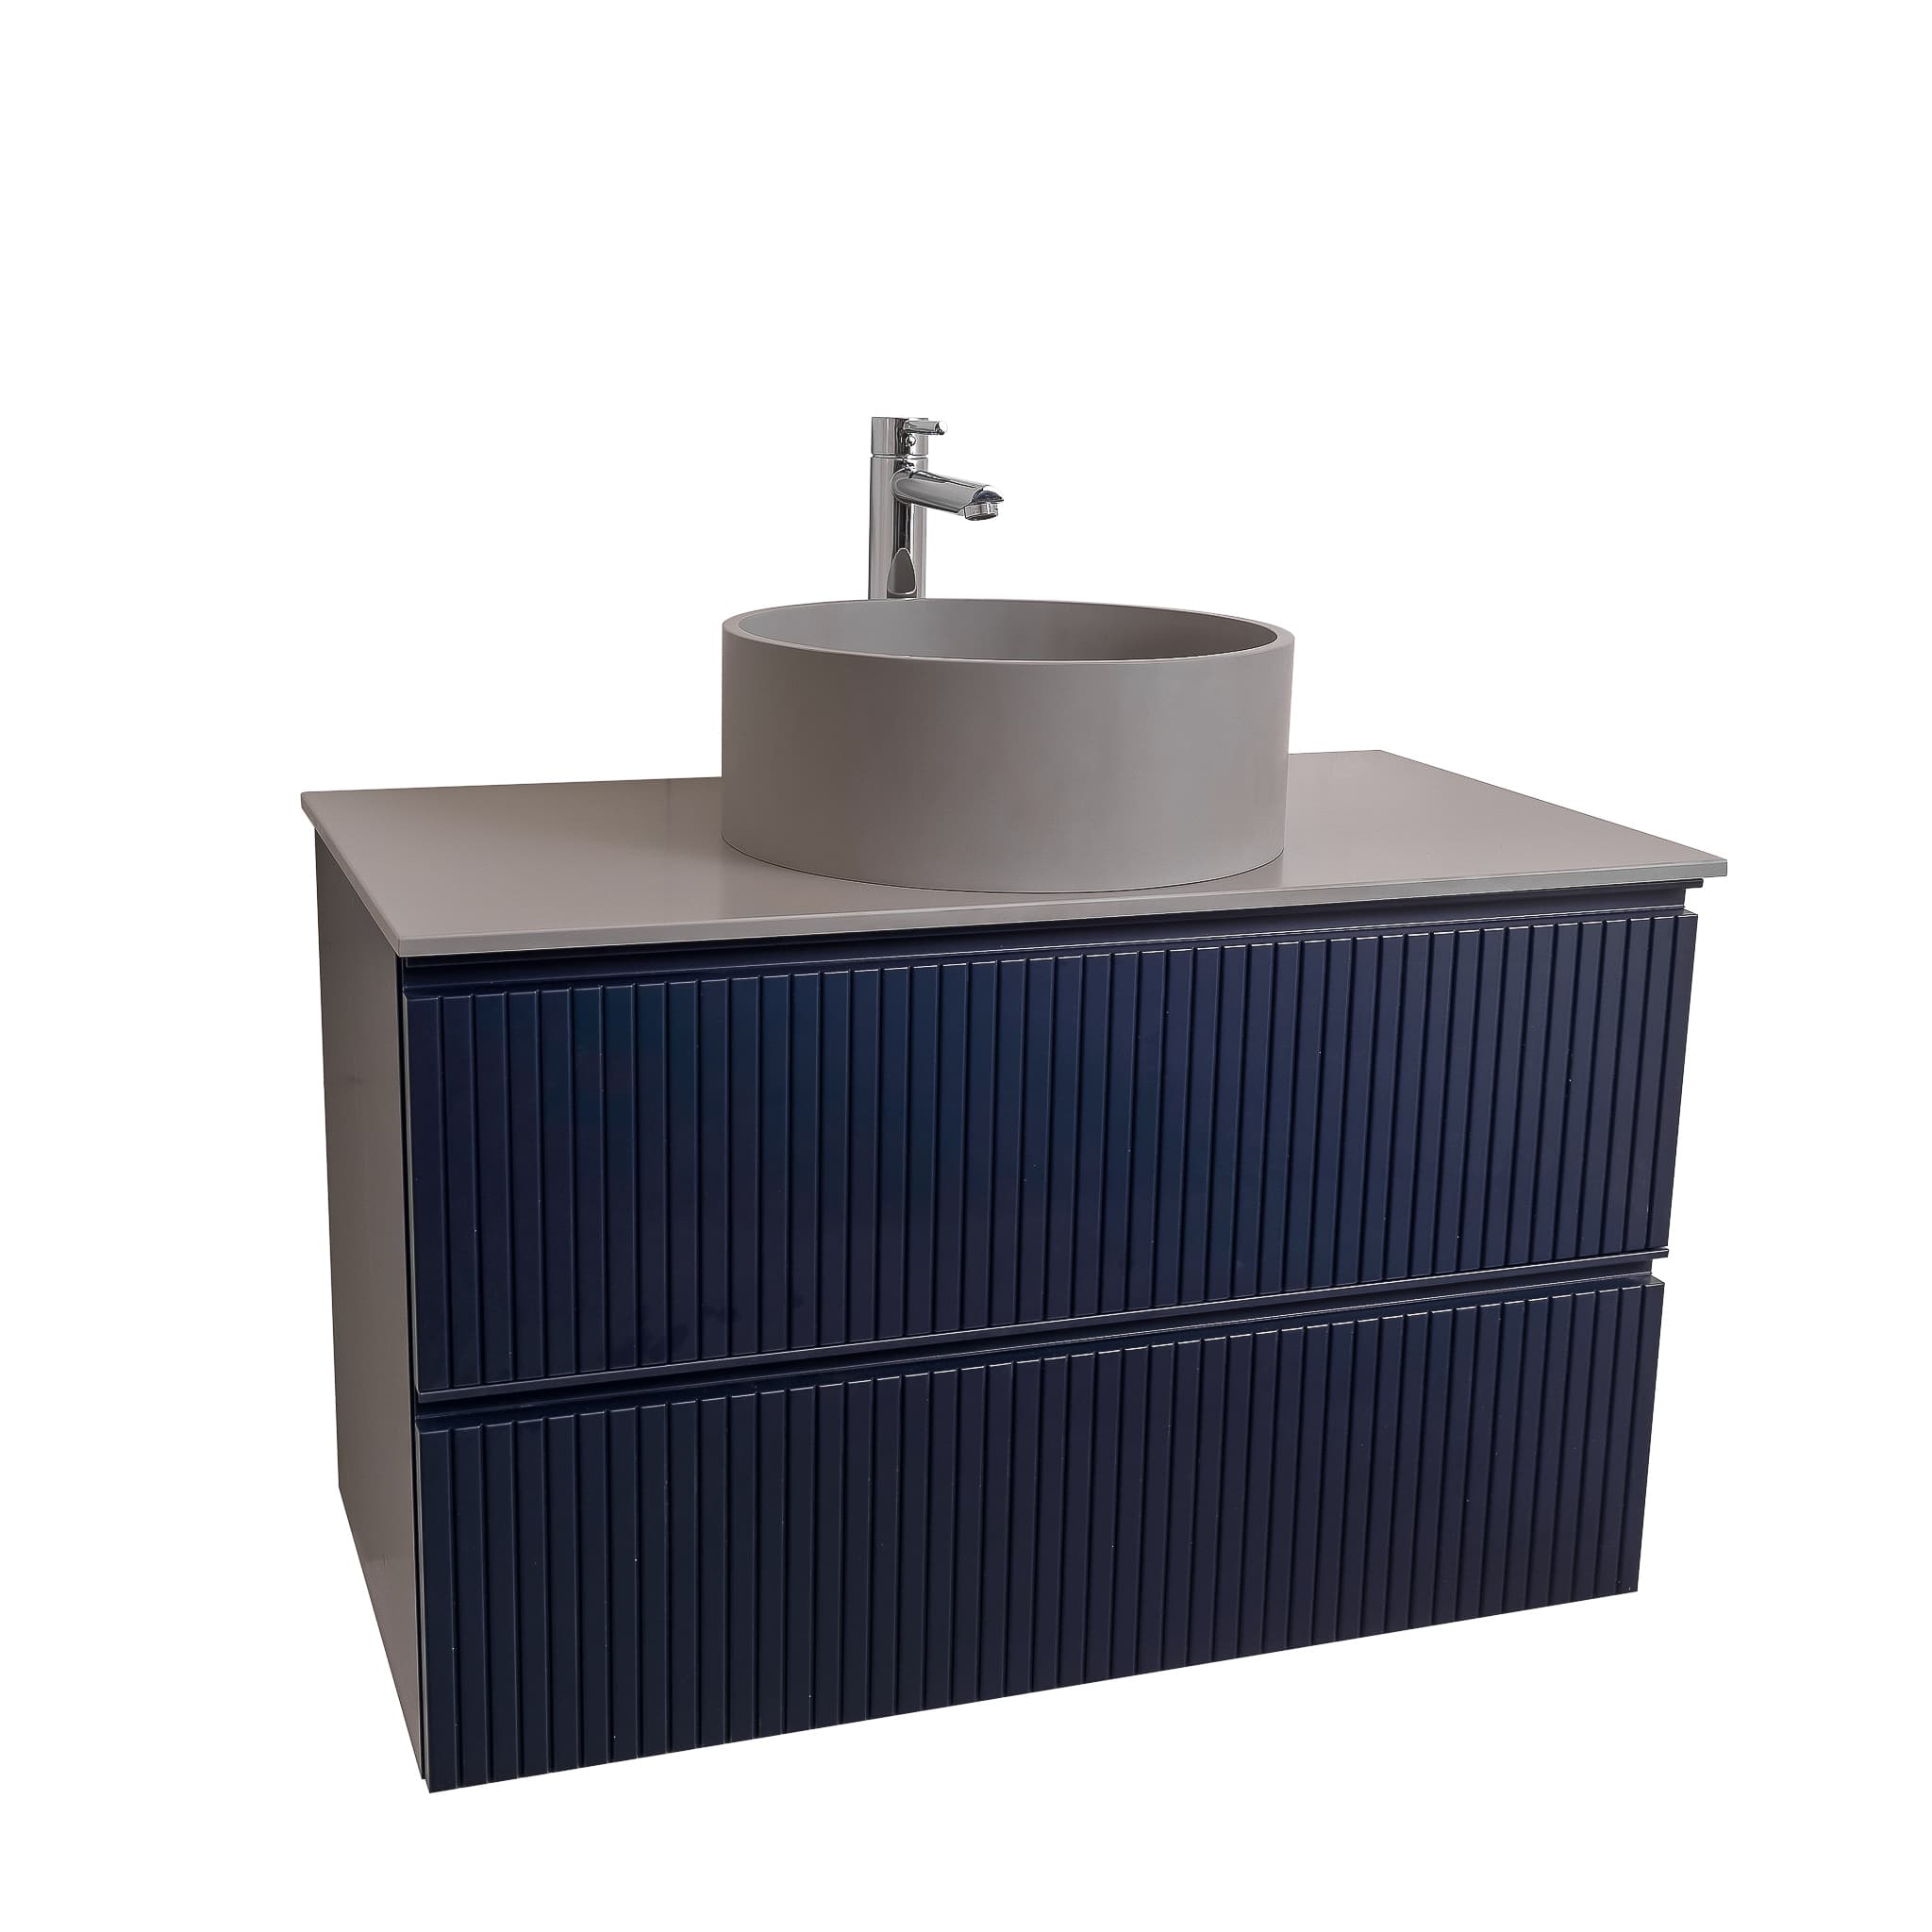 Ares 31.5 Matte Navy Blue Cabinet, Solid Surface Flat Grey Counter And Round Solid Surface Grey Basin 1386, Wall Mounted Modern Vanity Set